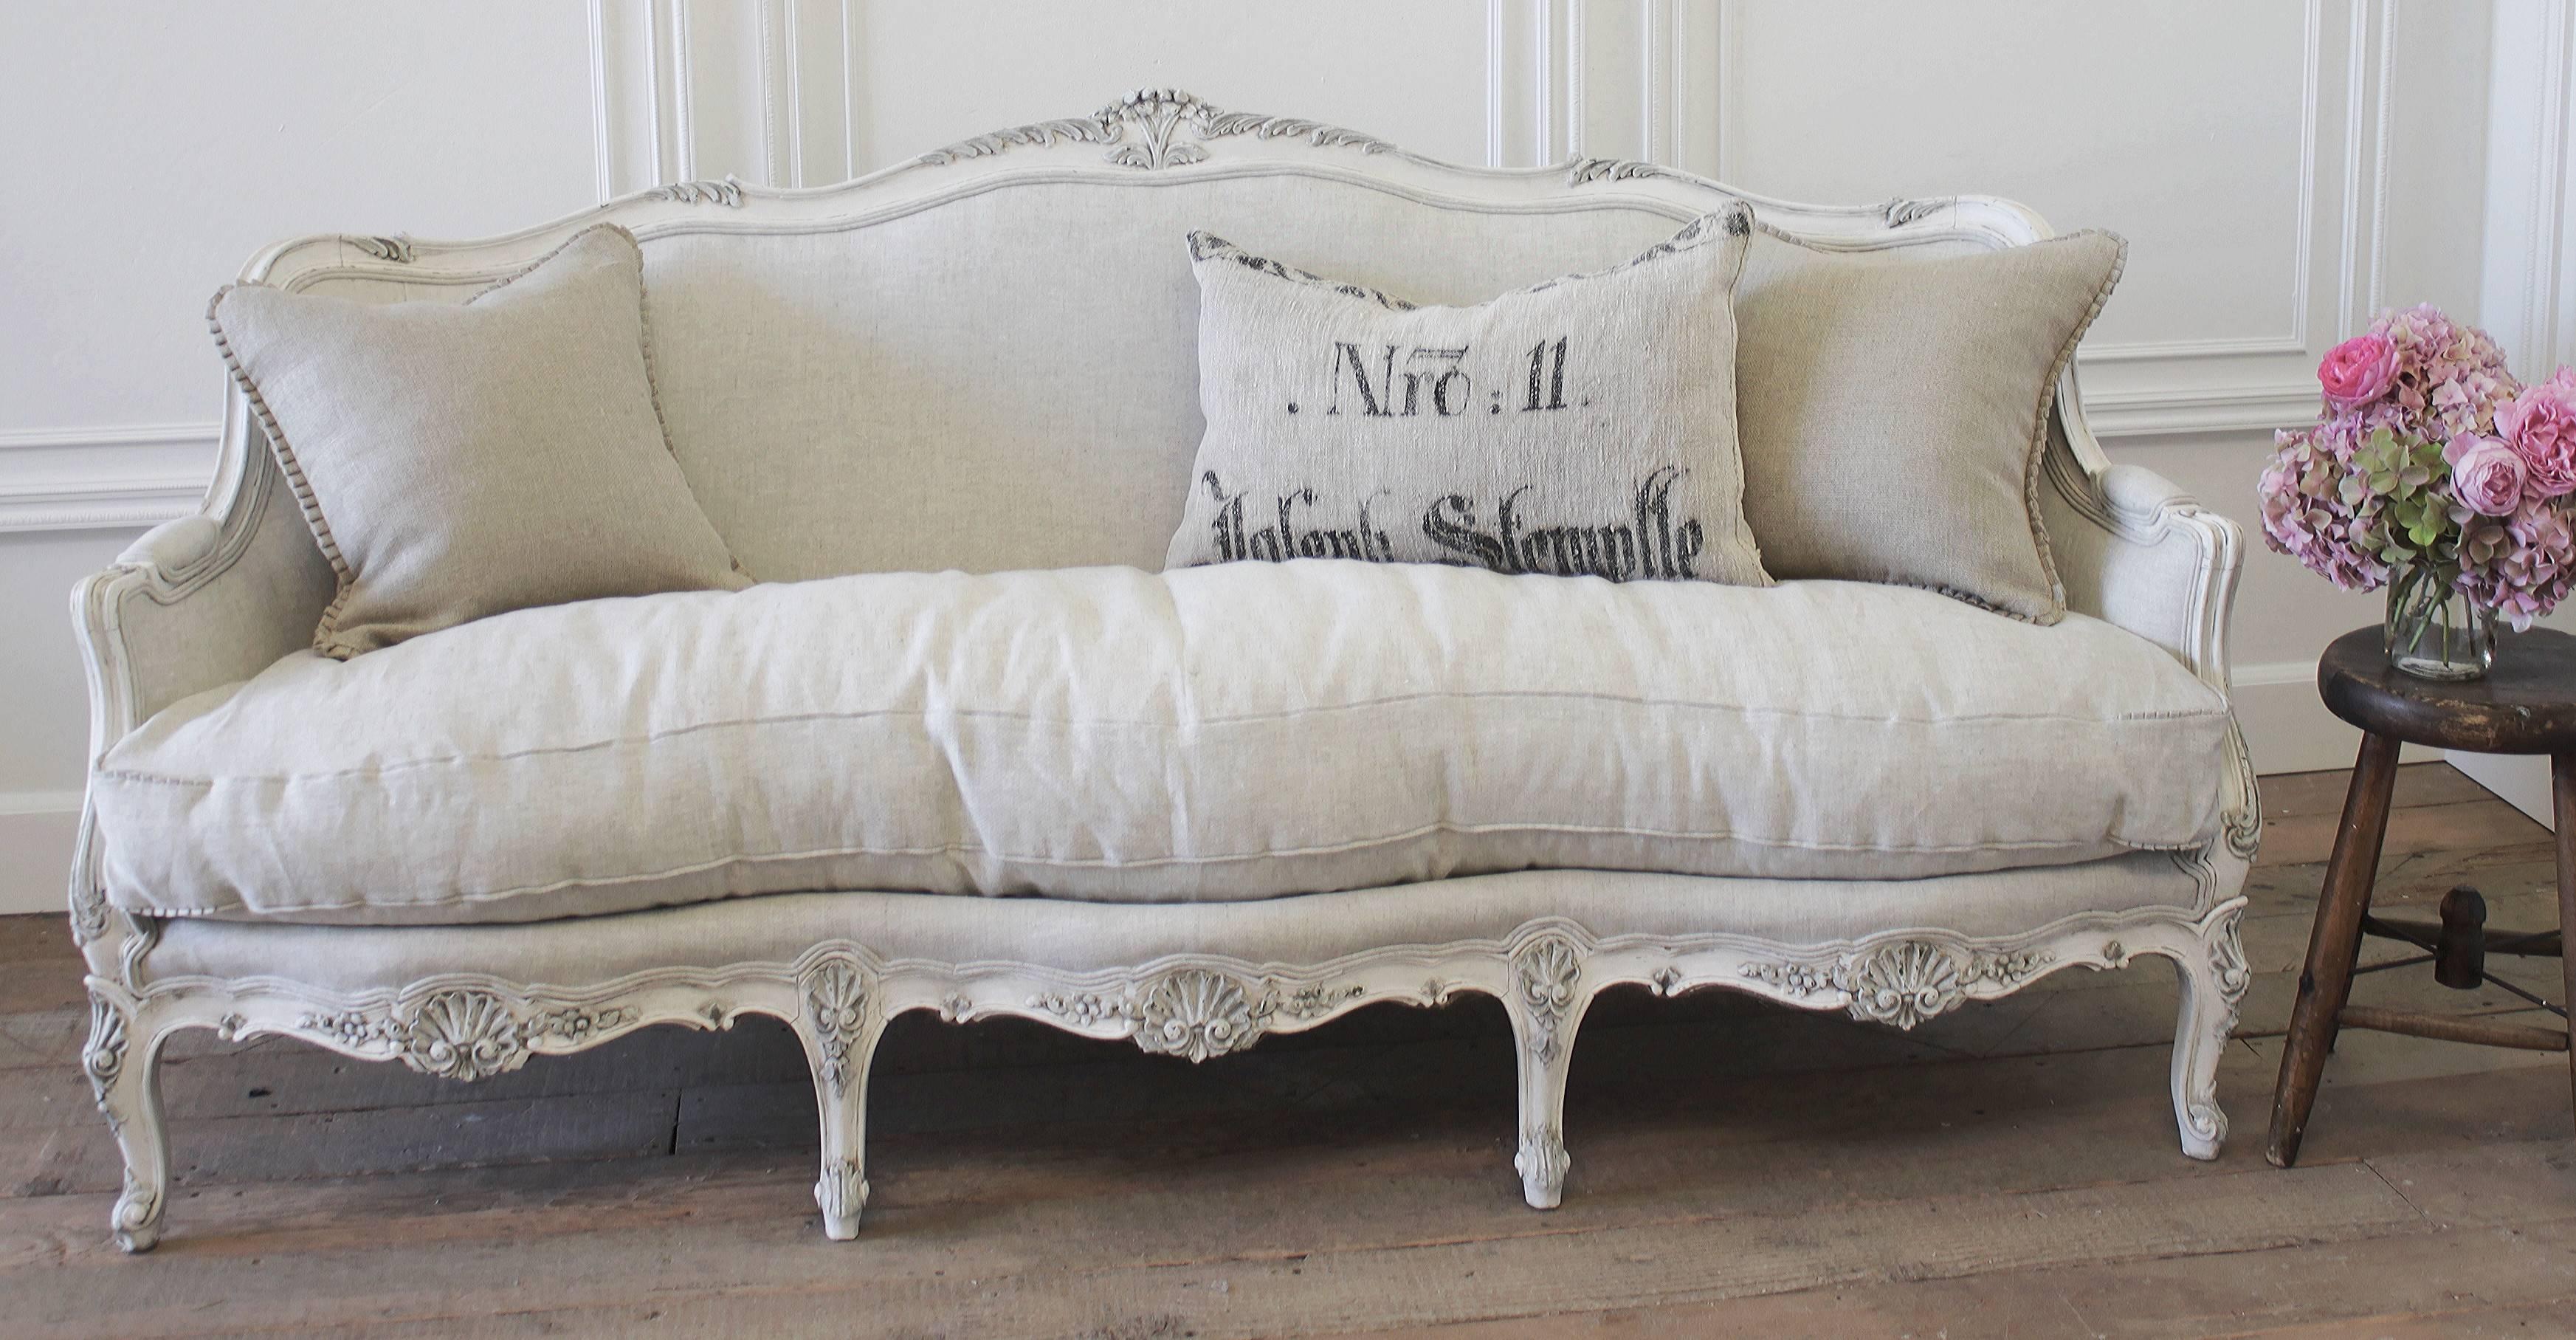 Beautiful antique sofa with carved flowers and shell motifs, painted in our signature oyster white finish and reupholstered in a heavy Belgian Linen. The sofa frame has a two tone painted finish, all of the carvings are hand-painted in a soft French